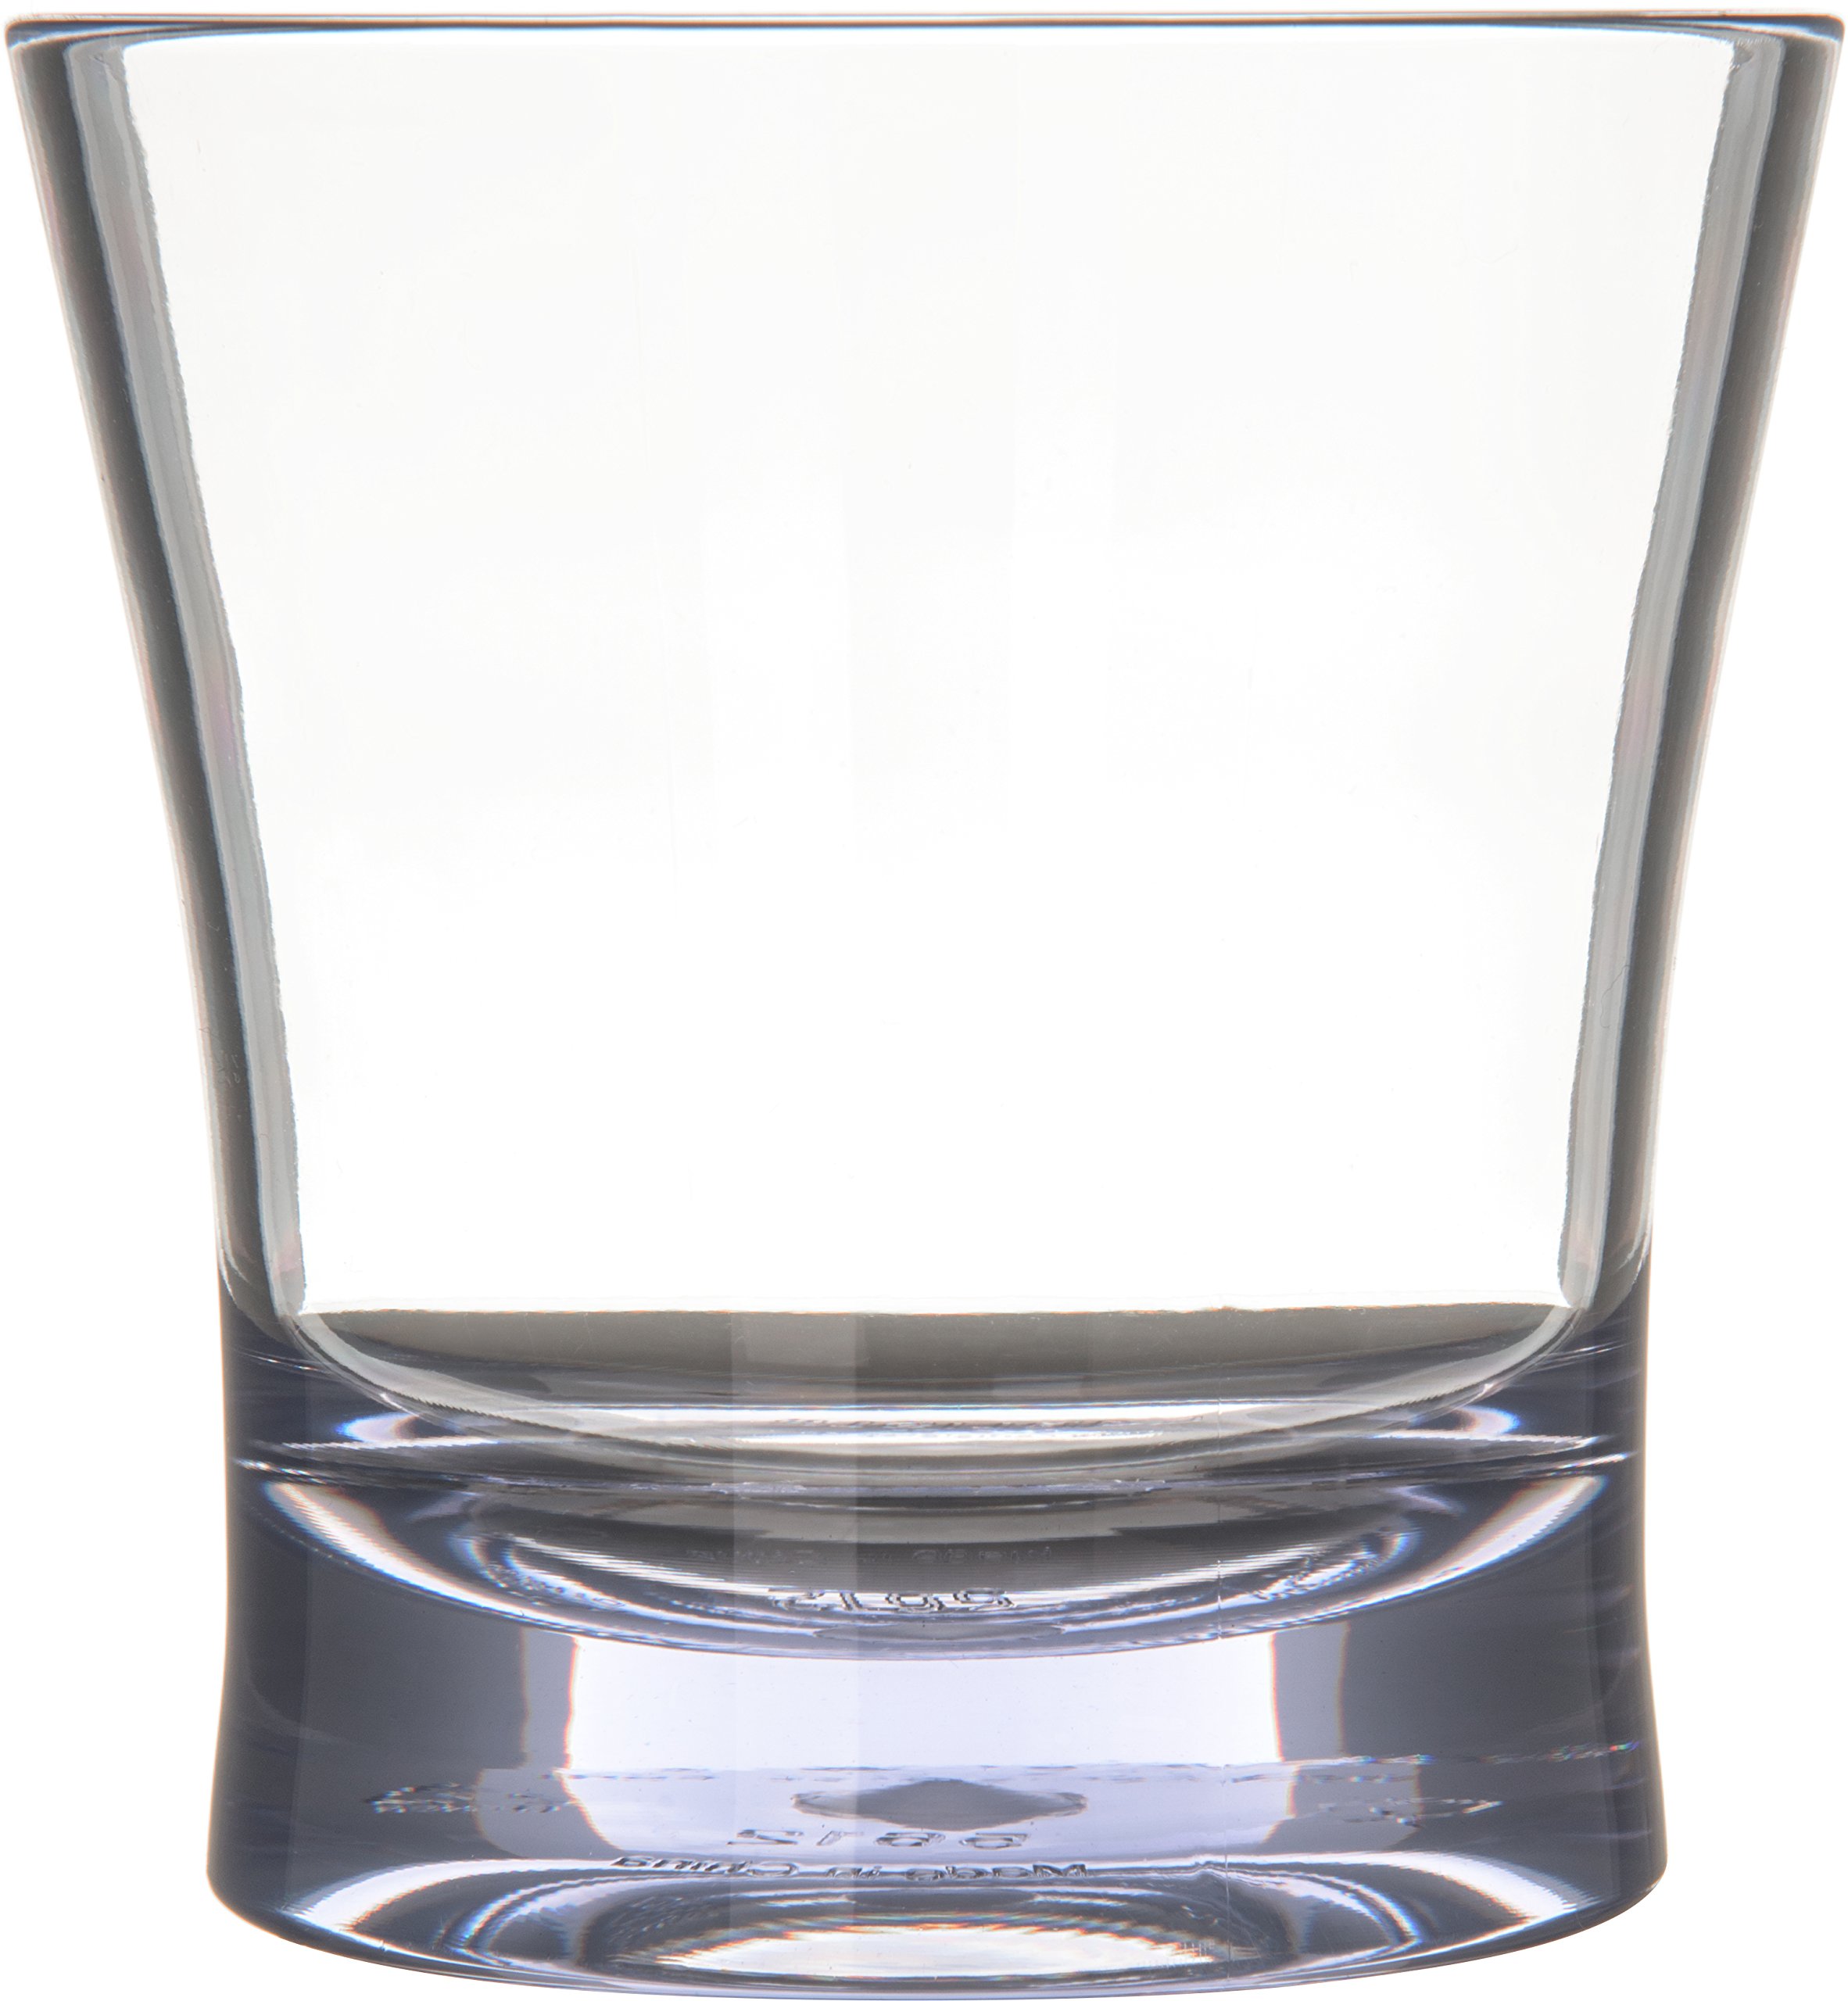 Carlisle FoodService Products Alibi Double Old Fashioned Glass for Restaurant, Kitchen, and Bar, Plastic, 12 Ounces, Clear